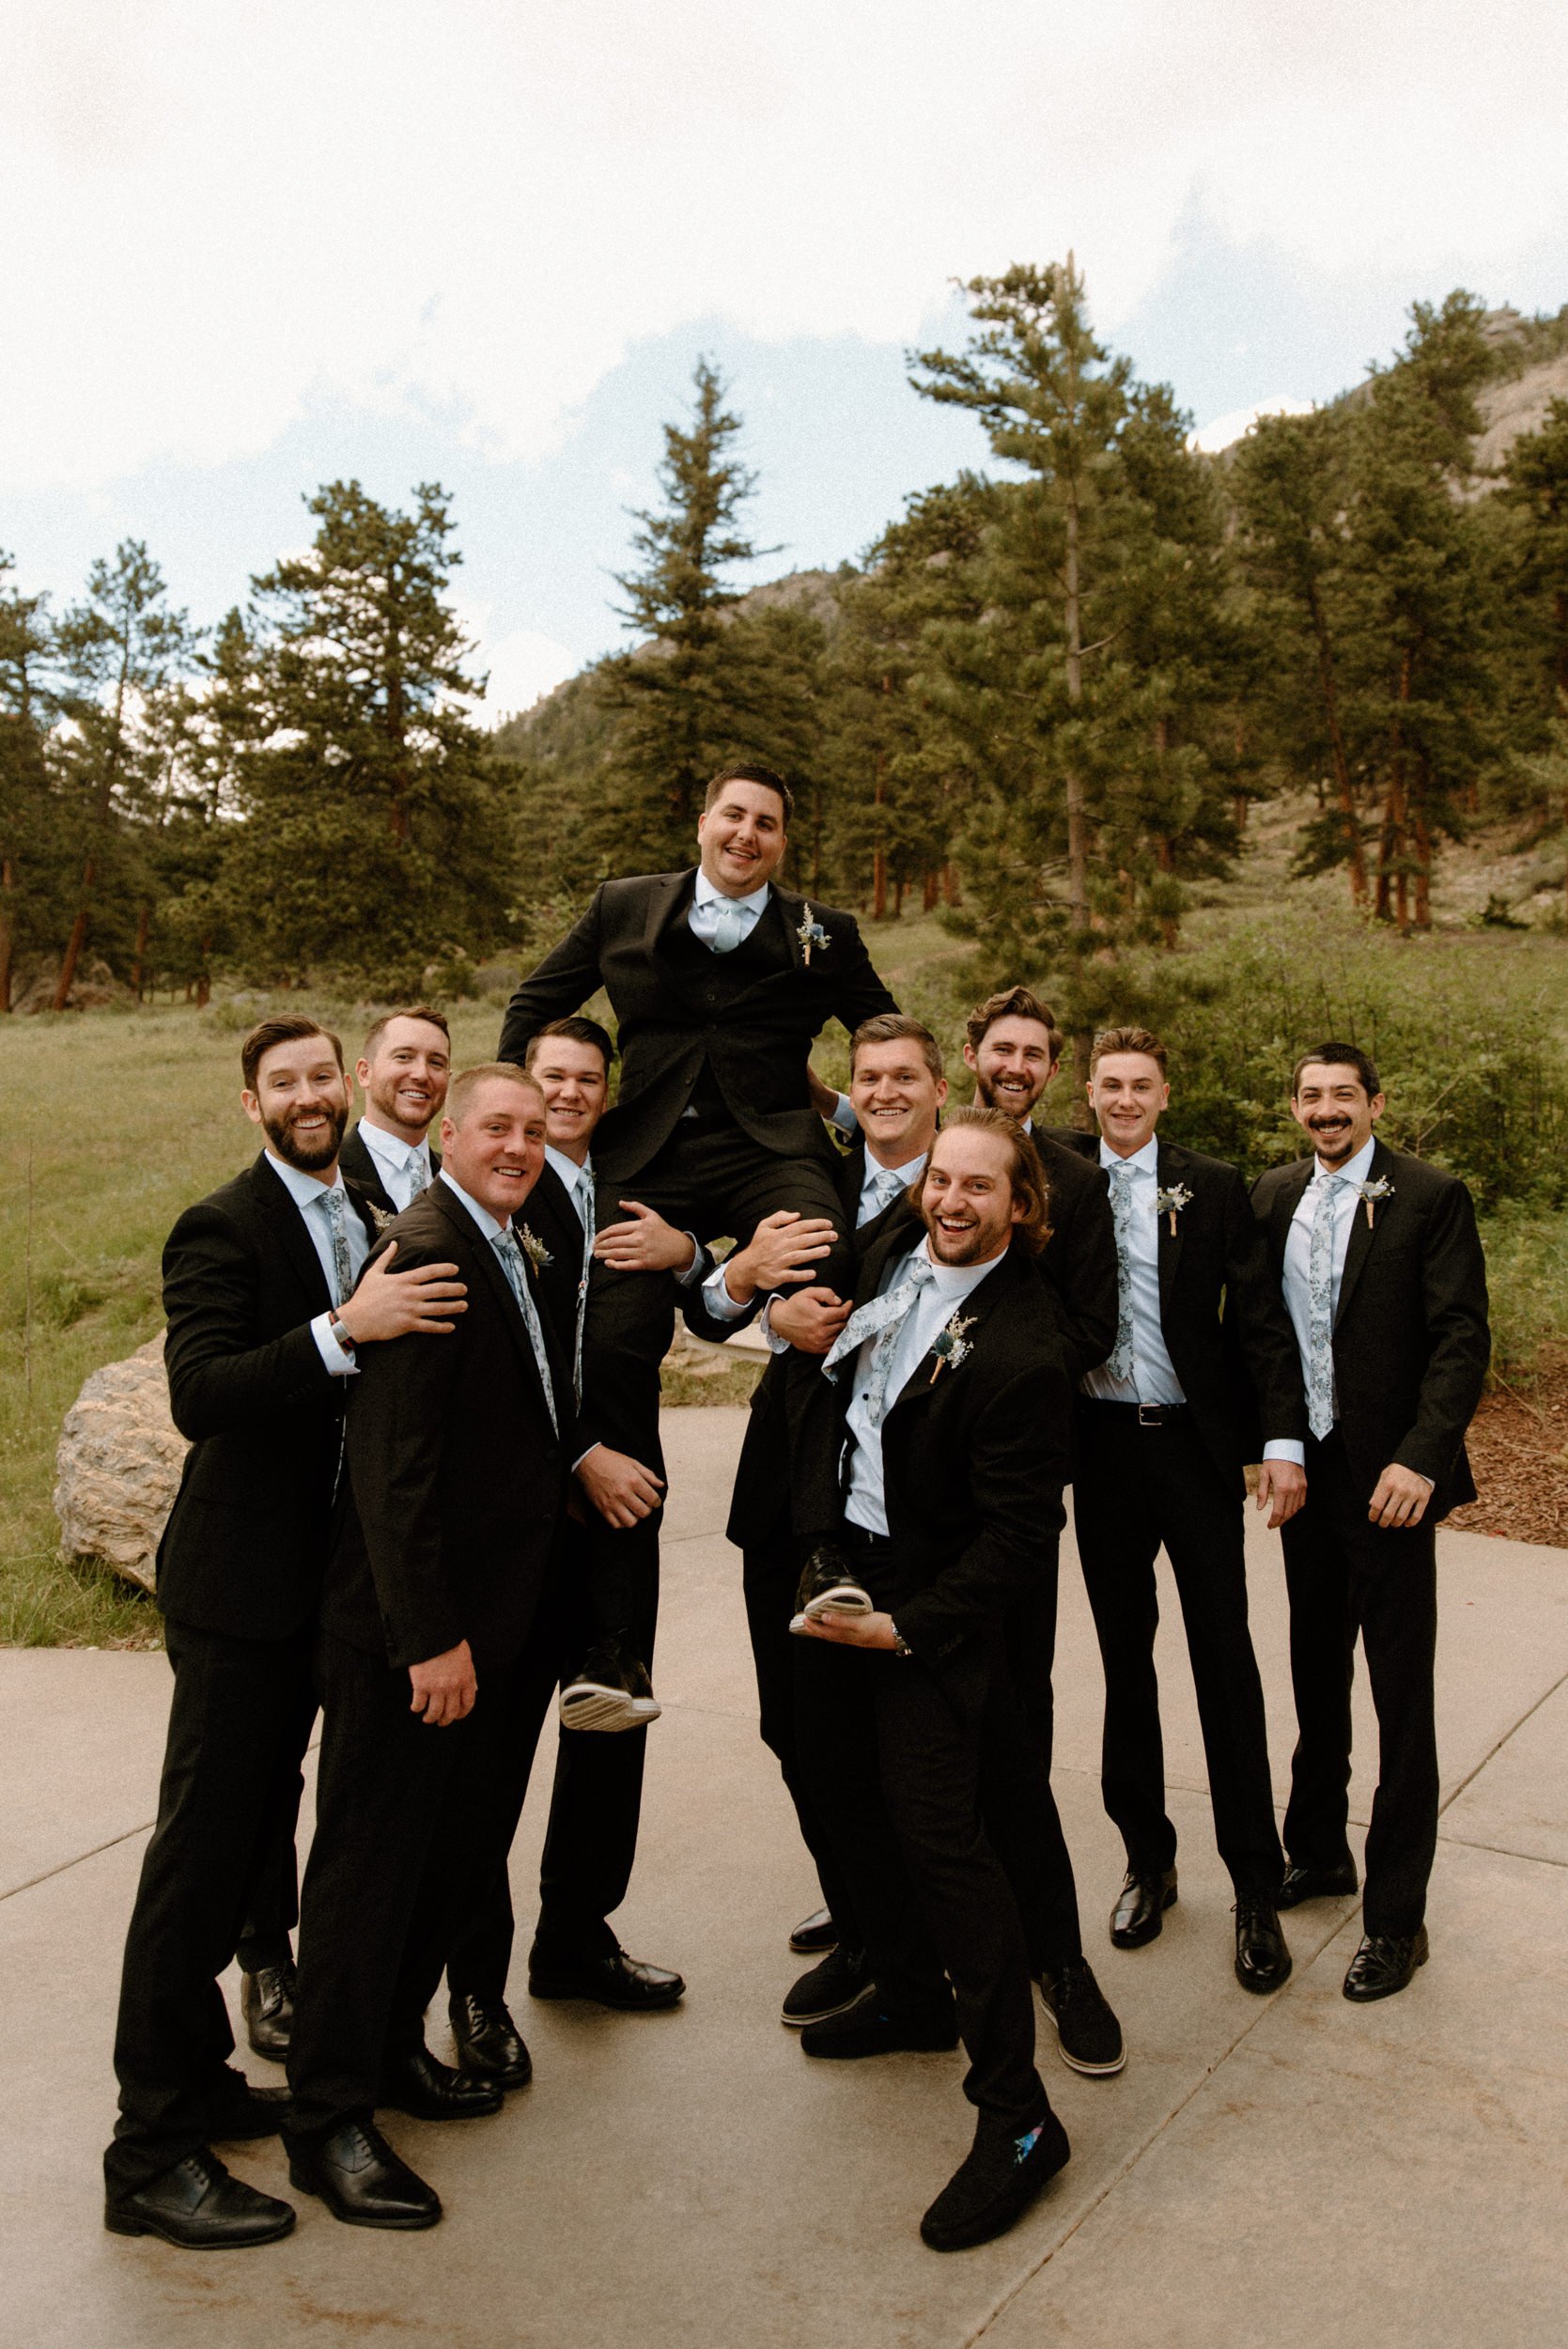 The groomsmen lift the groom up and laugh together